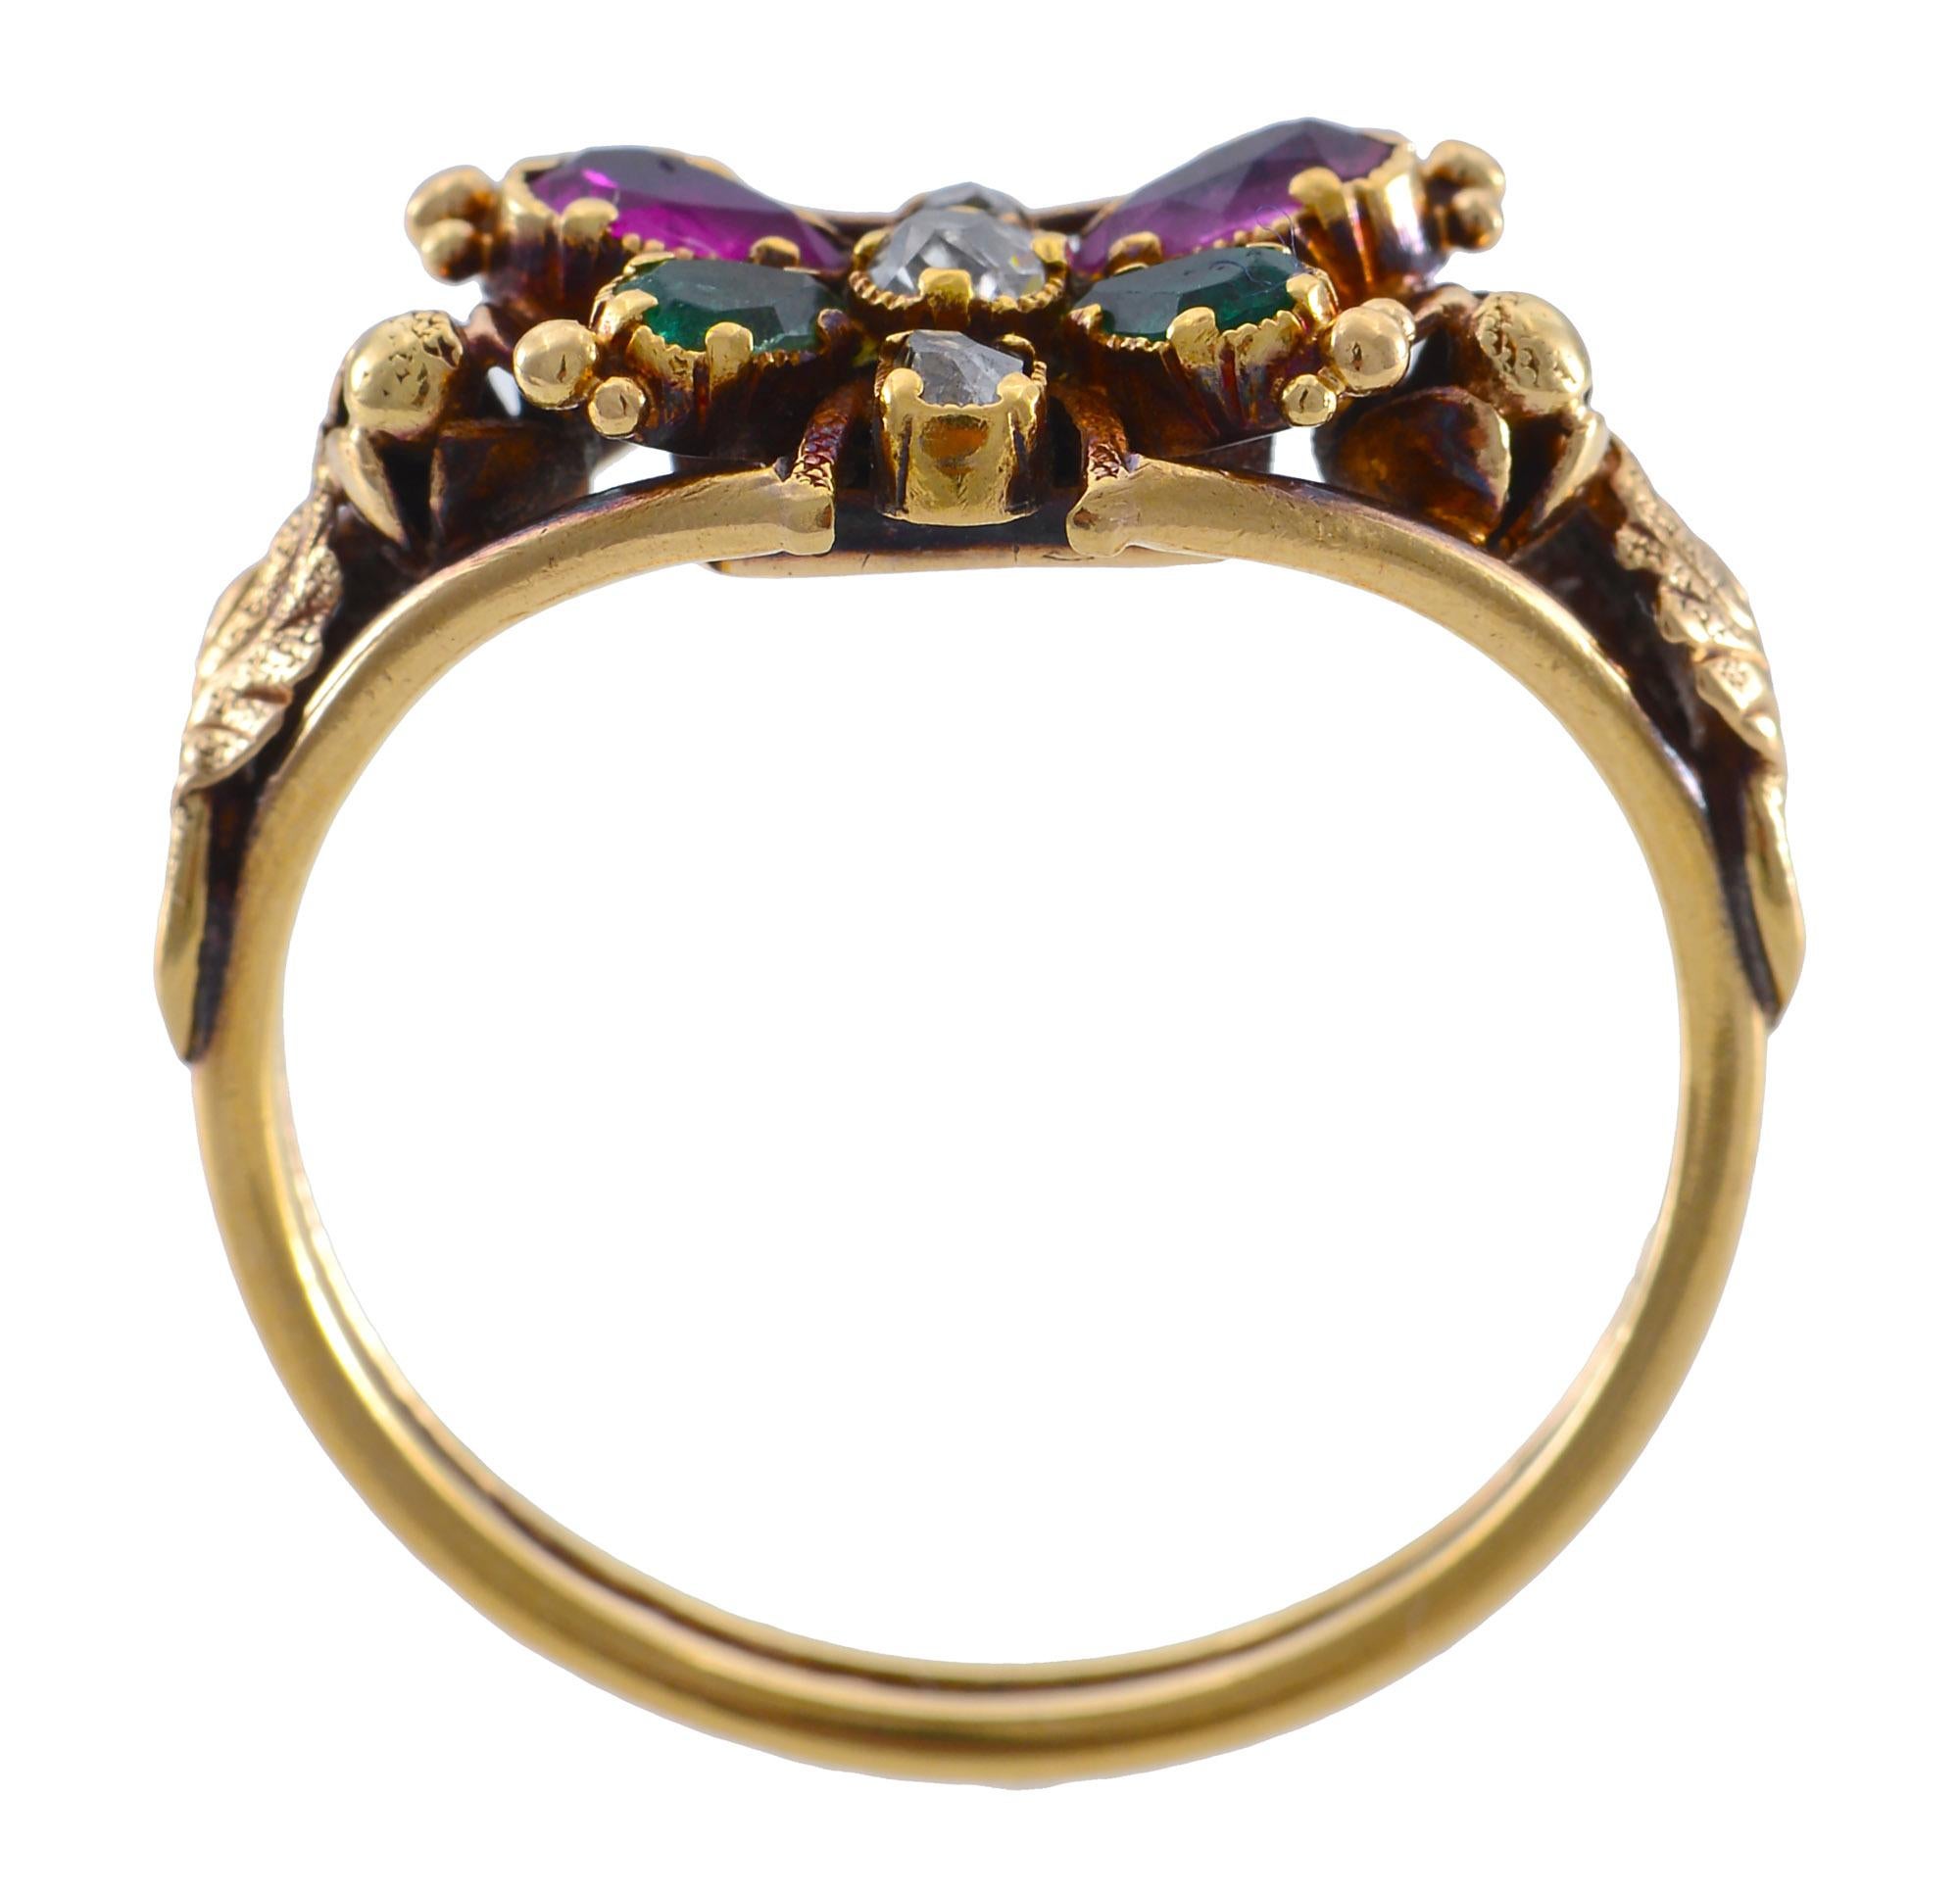 This sublime Georgian Circa 1830 Butterfly ring is set with multi coloured stones  and  a centre diamond in yellow gold with a  foiled and closed back settings as used in the Georgian period .The back of the ring contains a glazed compartment